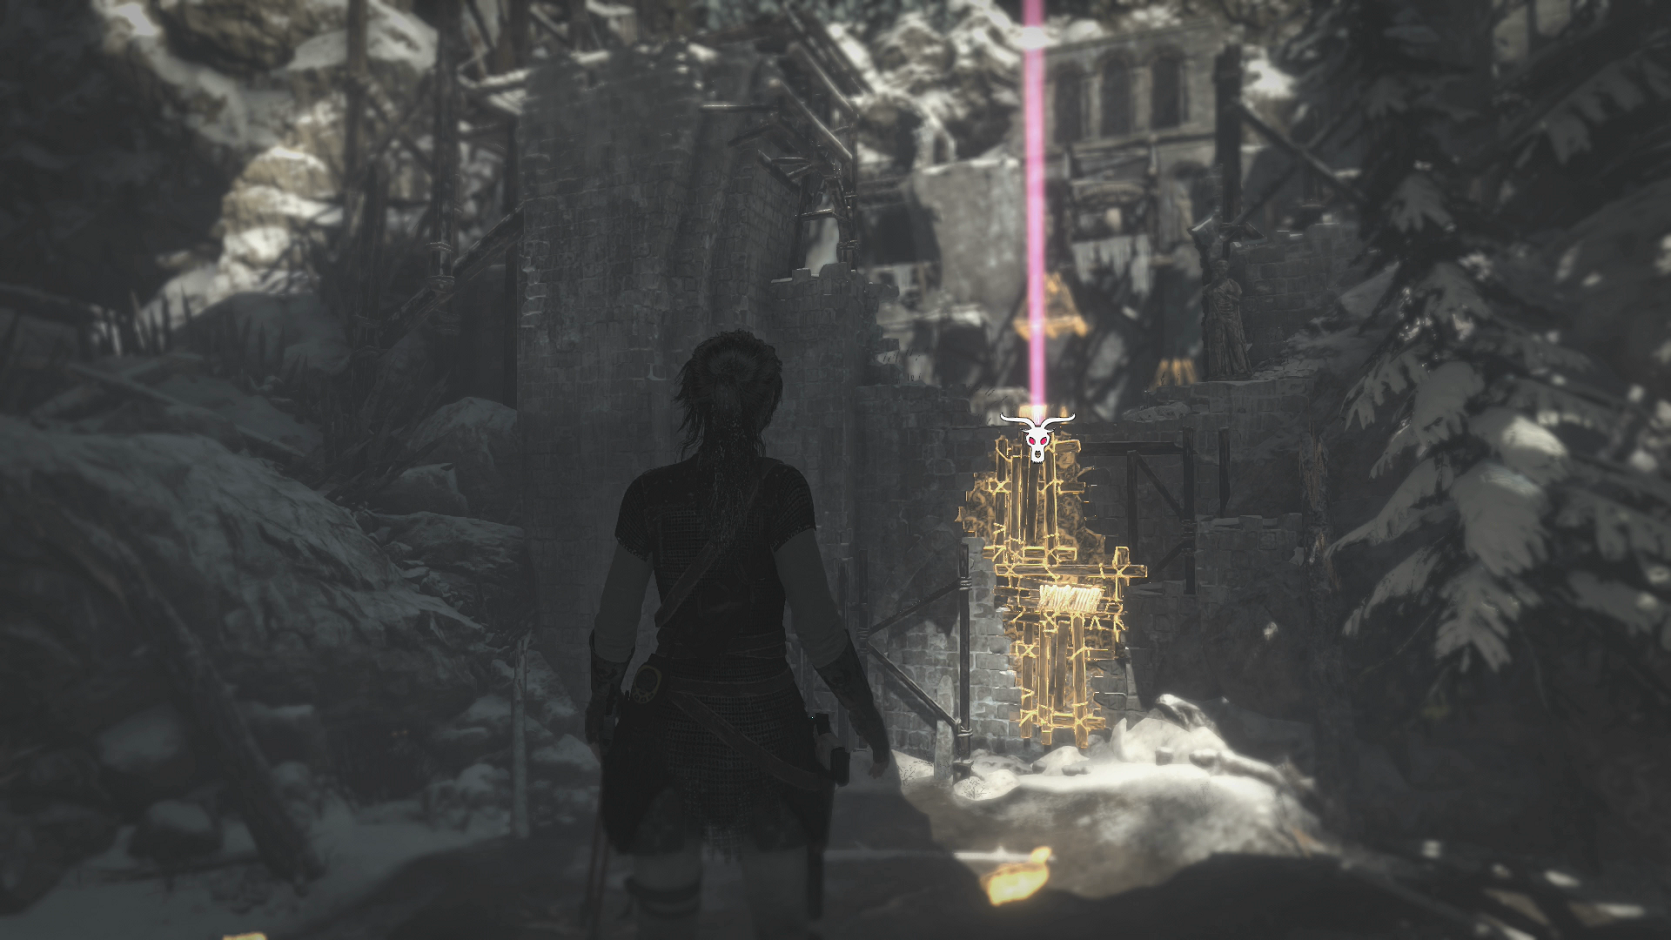 Here's a first look at Rise of the Tomb Raider's upcoming 'Baba Yaga' DLC